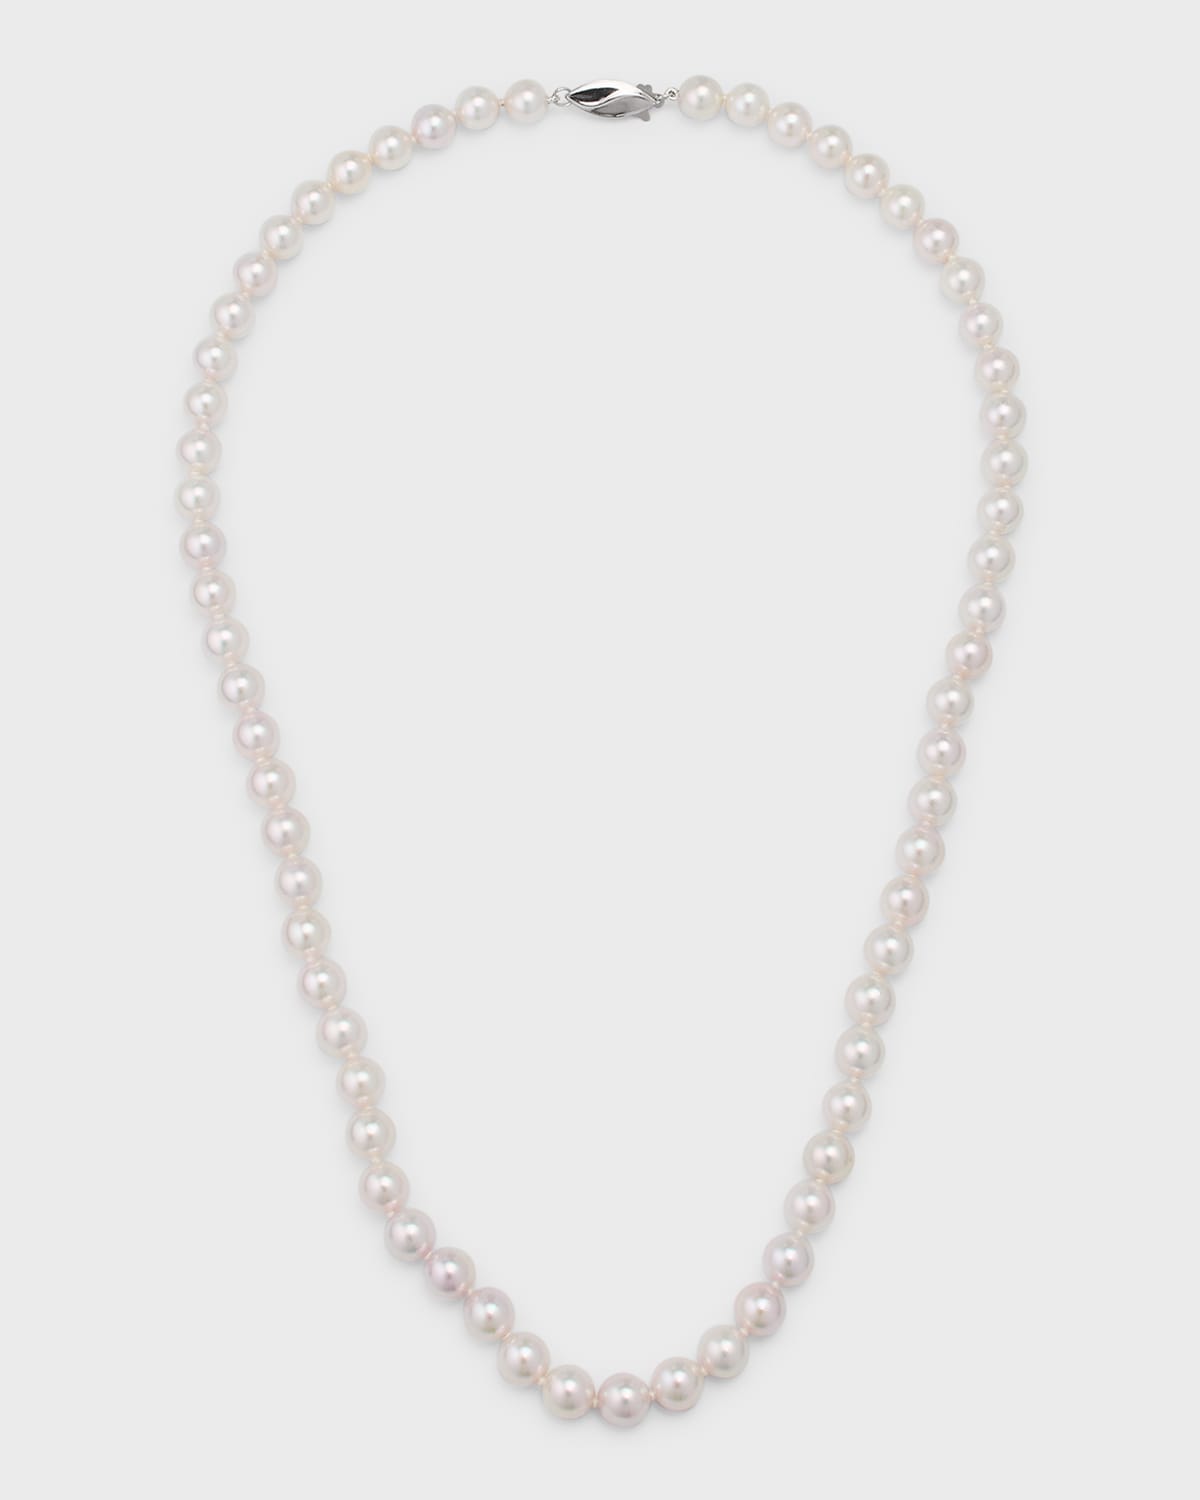 18K White Gold Akoya Pearl Necklace, 20"